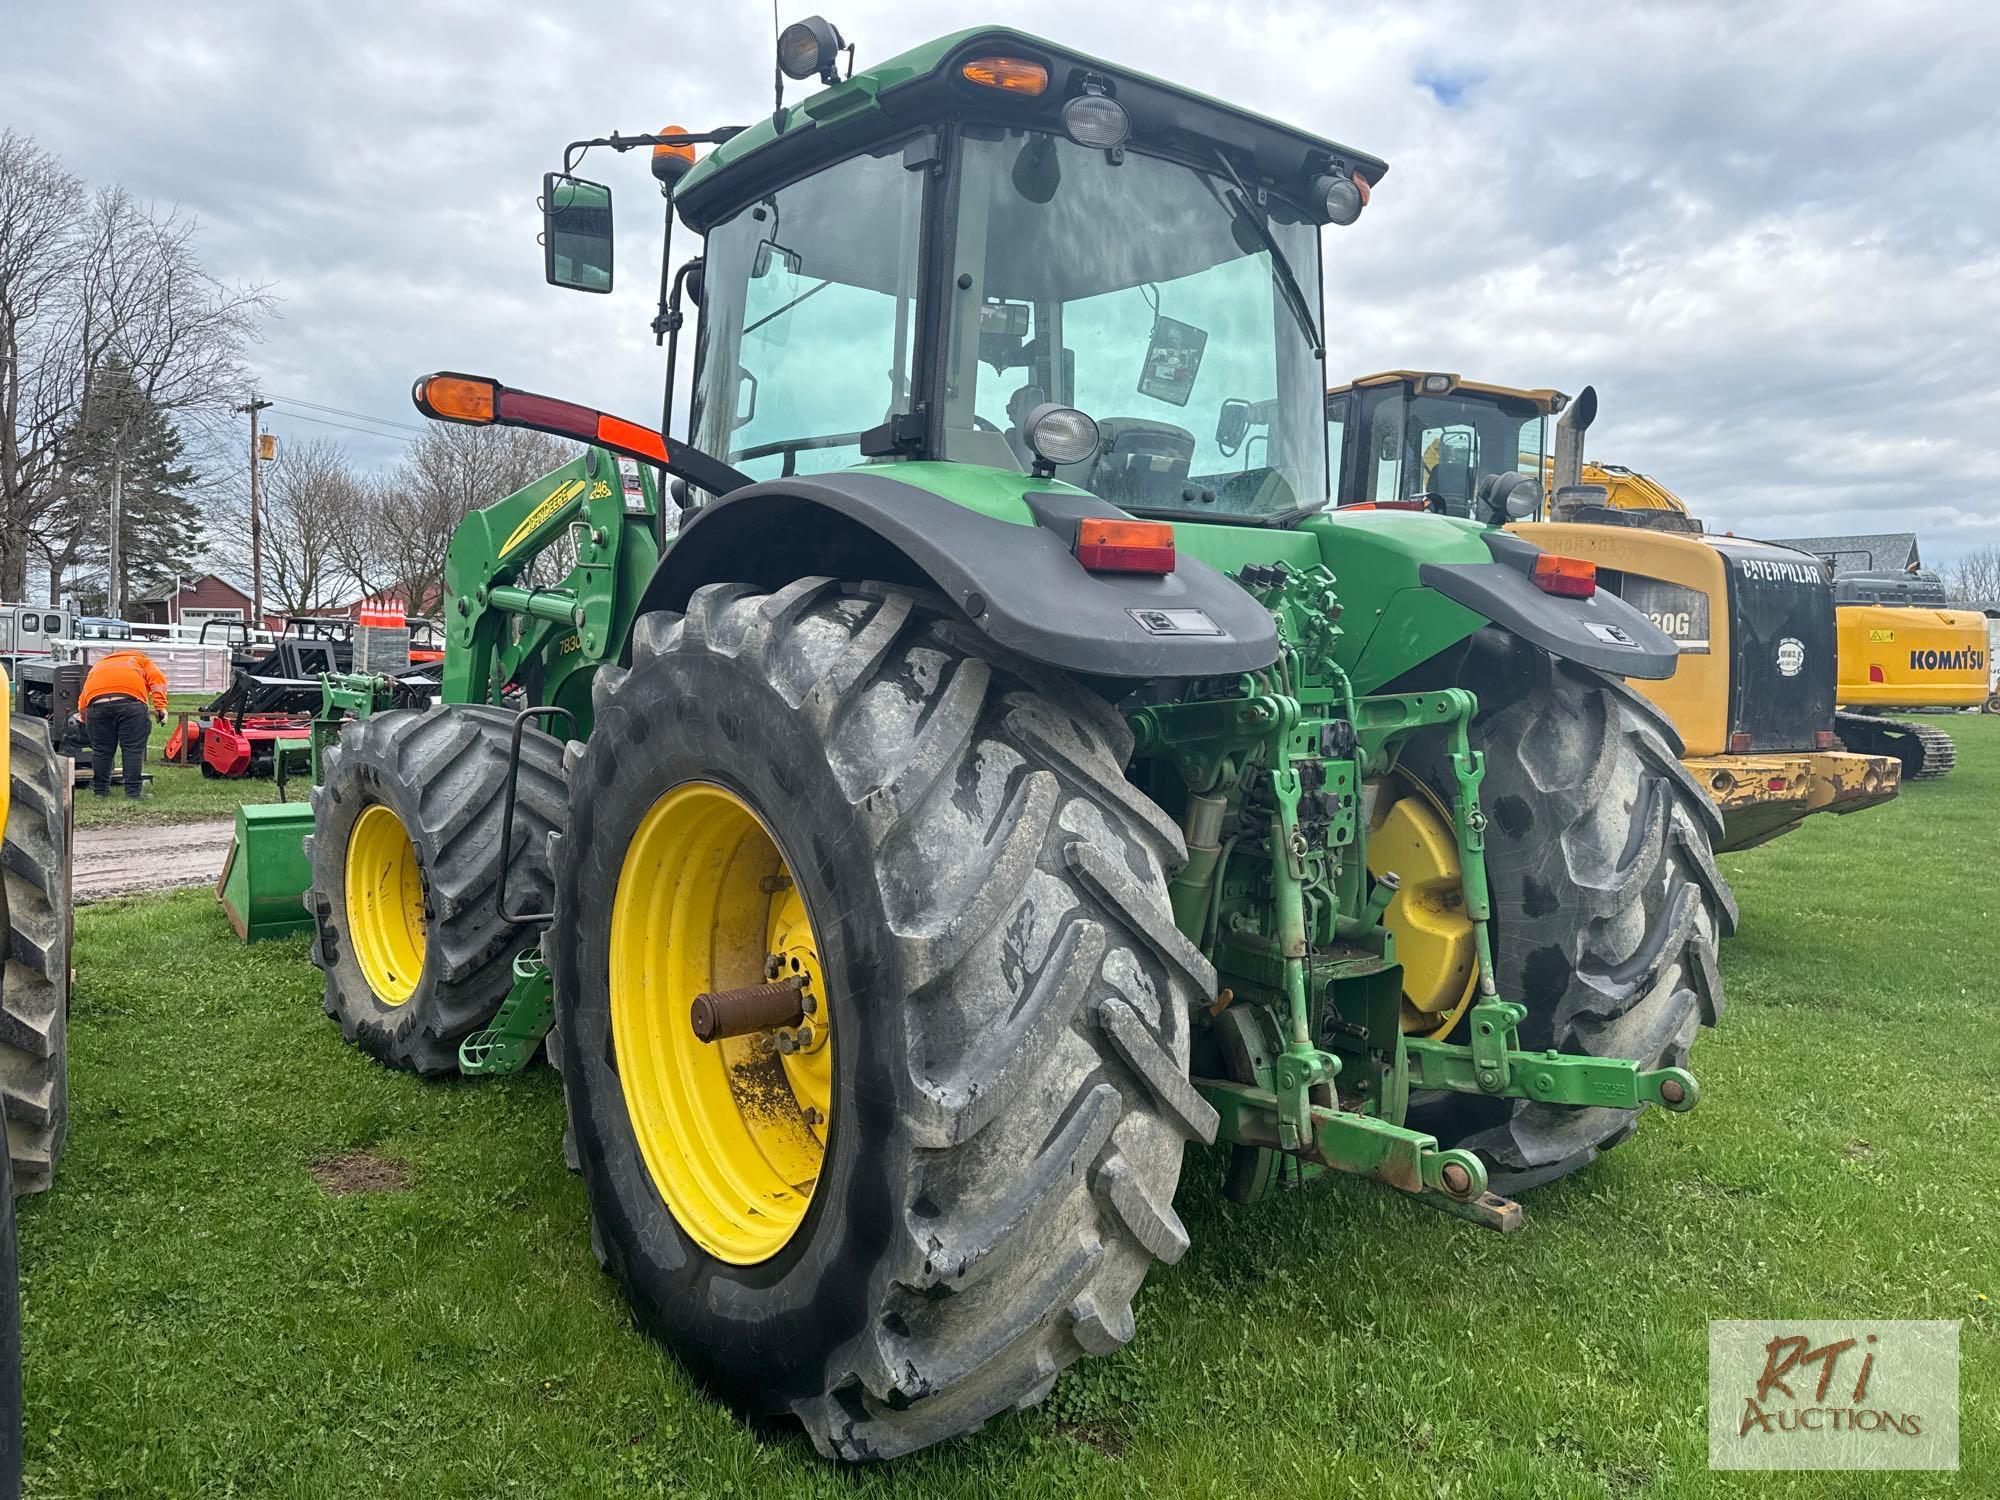 John Deere 7830 MFWD tractor with cab, loader with grapple, 710/70 R38 rear tires, 3 remotes,